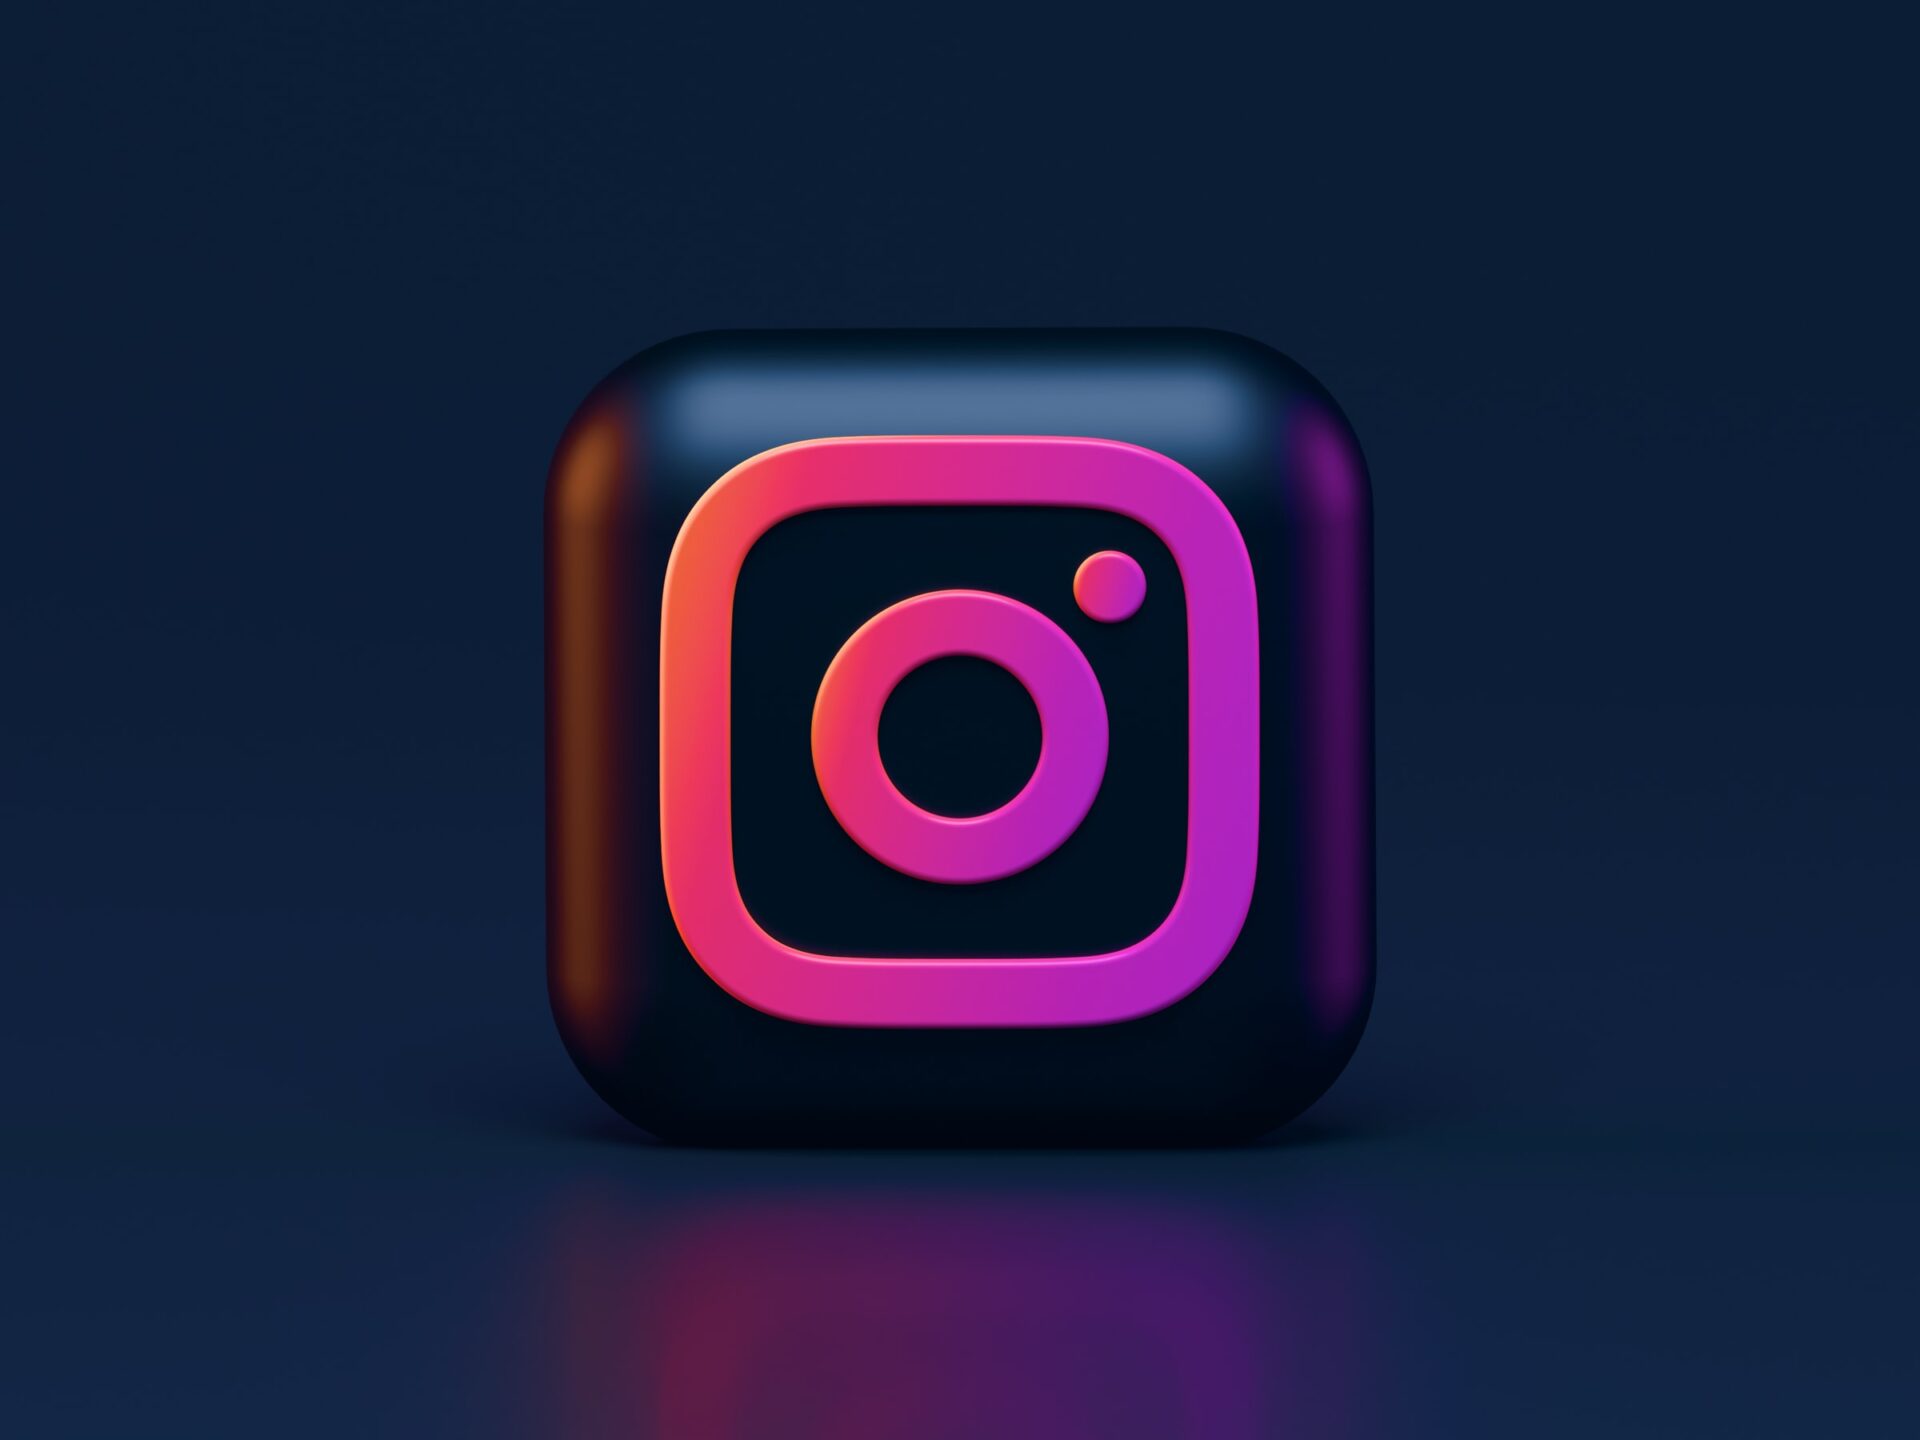 Instagram continues to perform well despite inconsistent brand identity